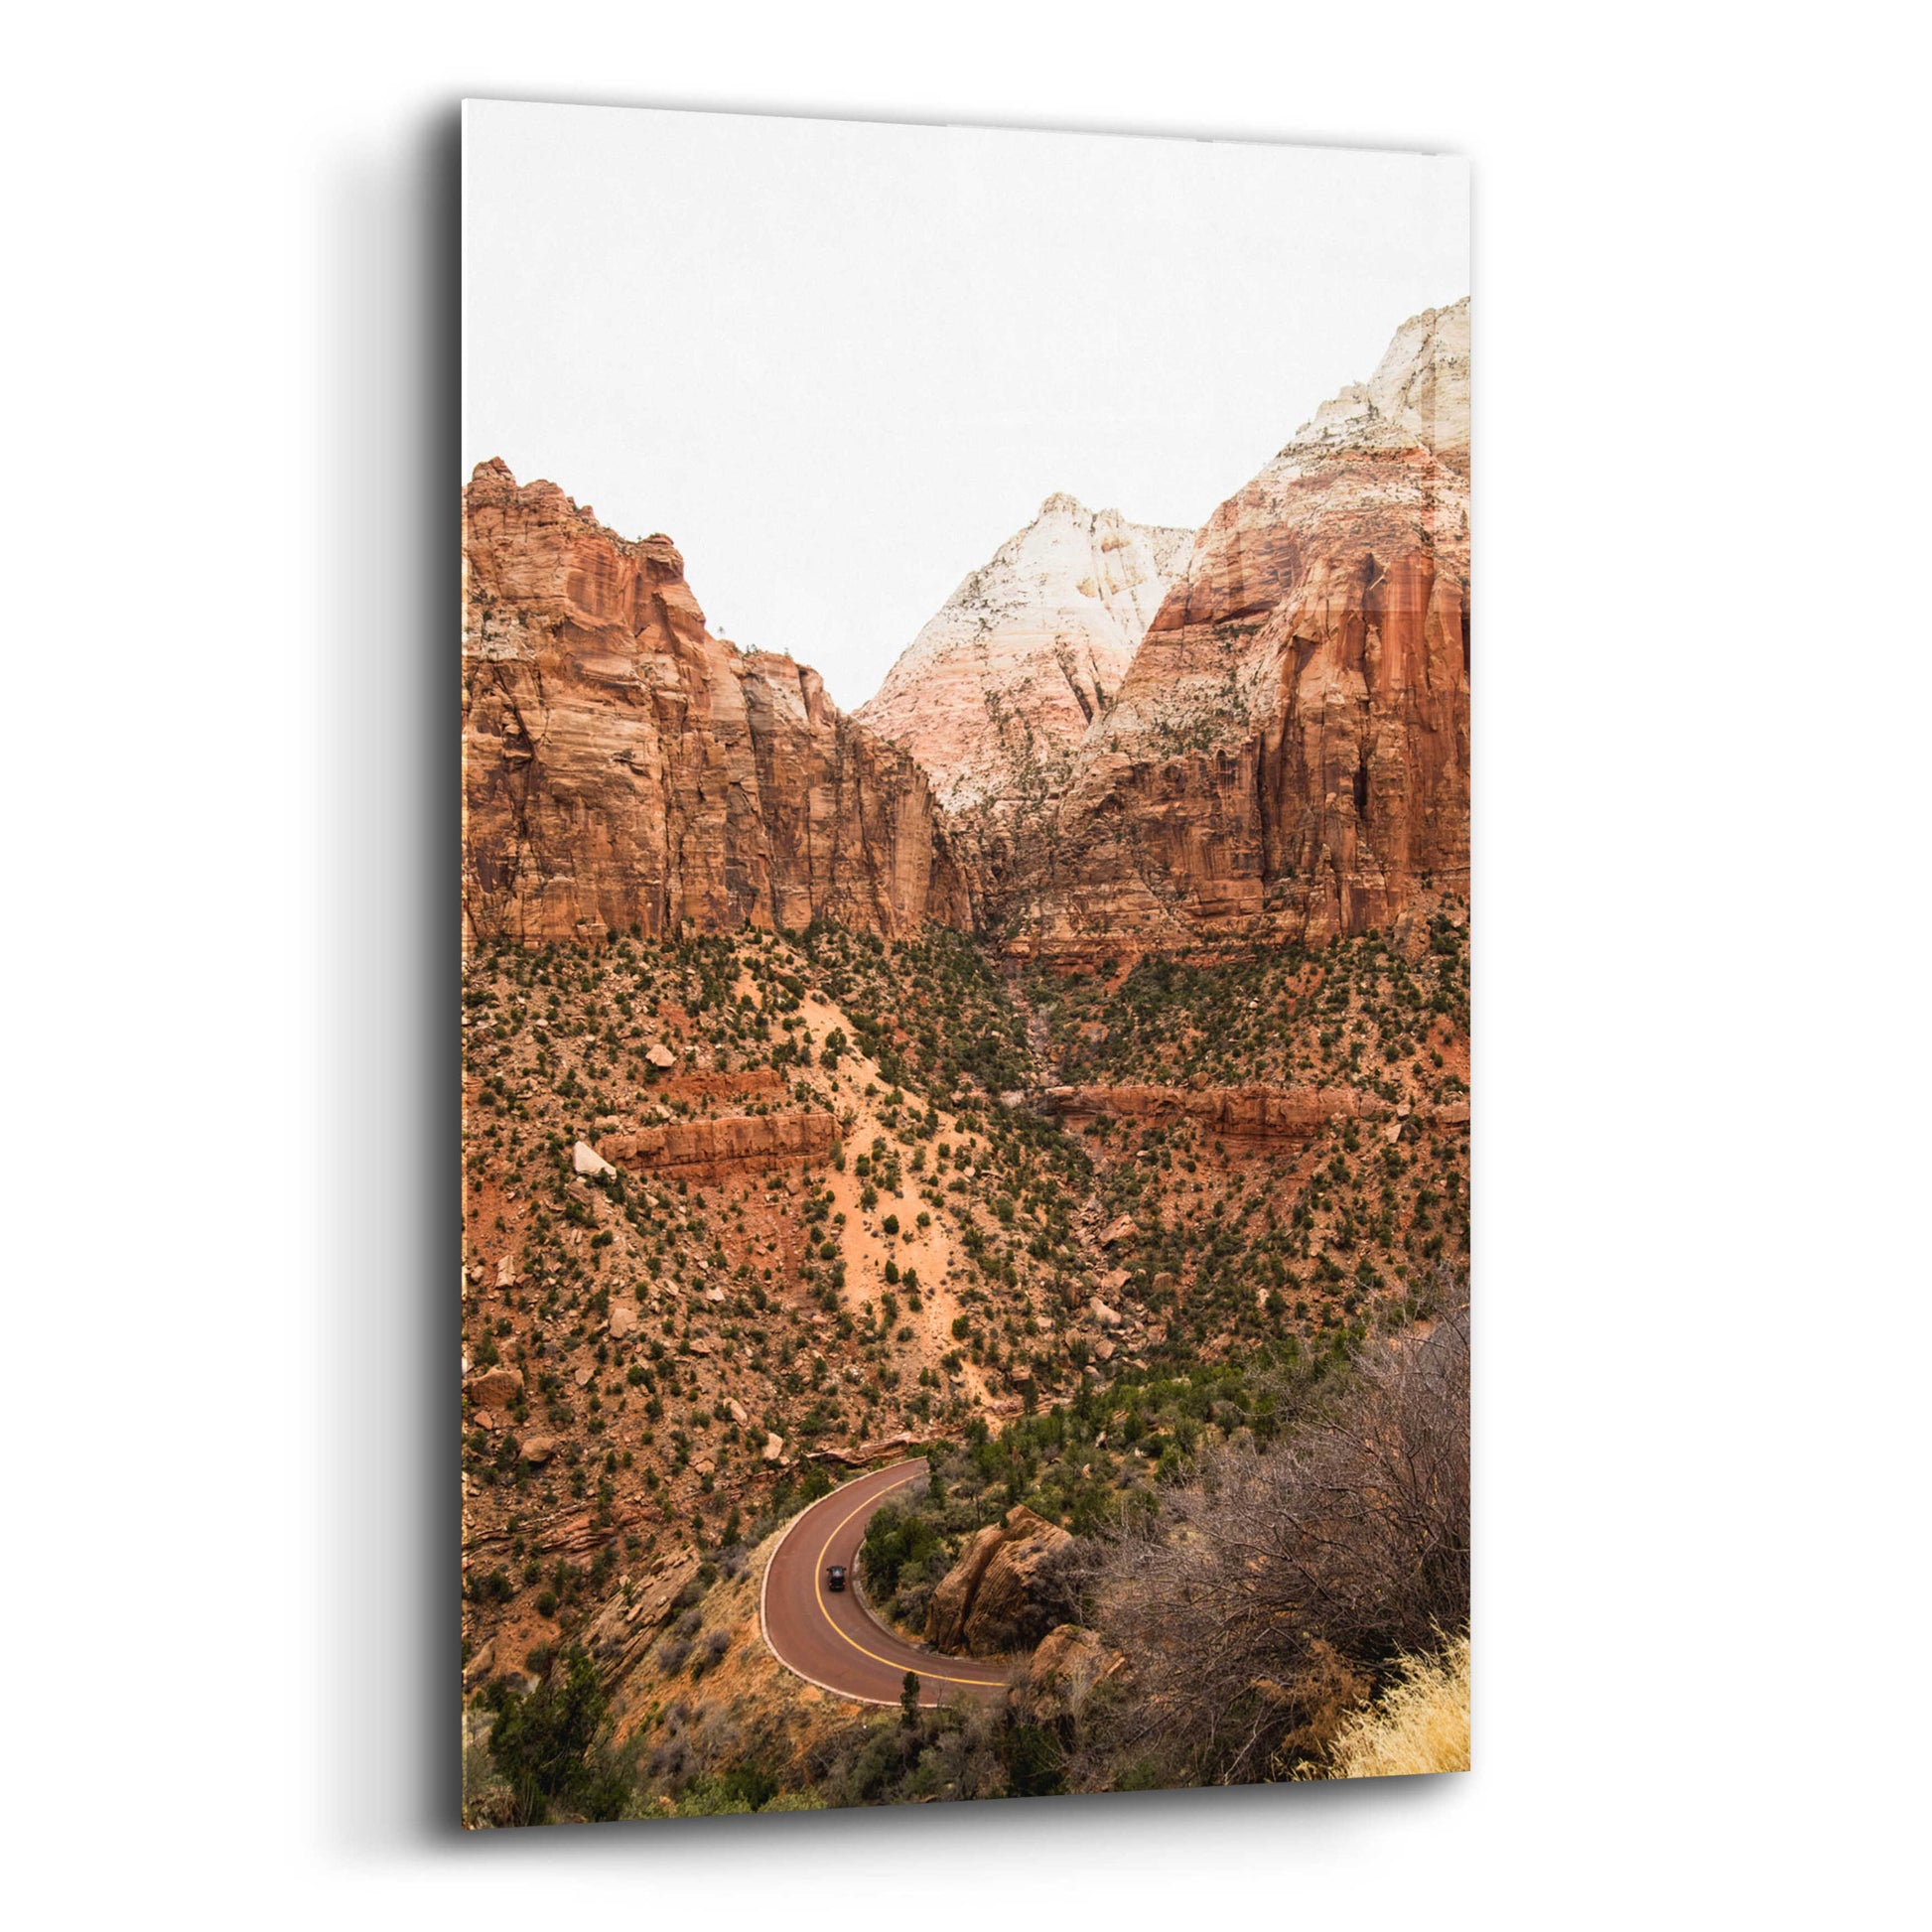 Epic Art ' Car In Zion National Park' by Robin Vandenabeele, Acrylic Glass Wall Art,12x16